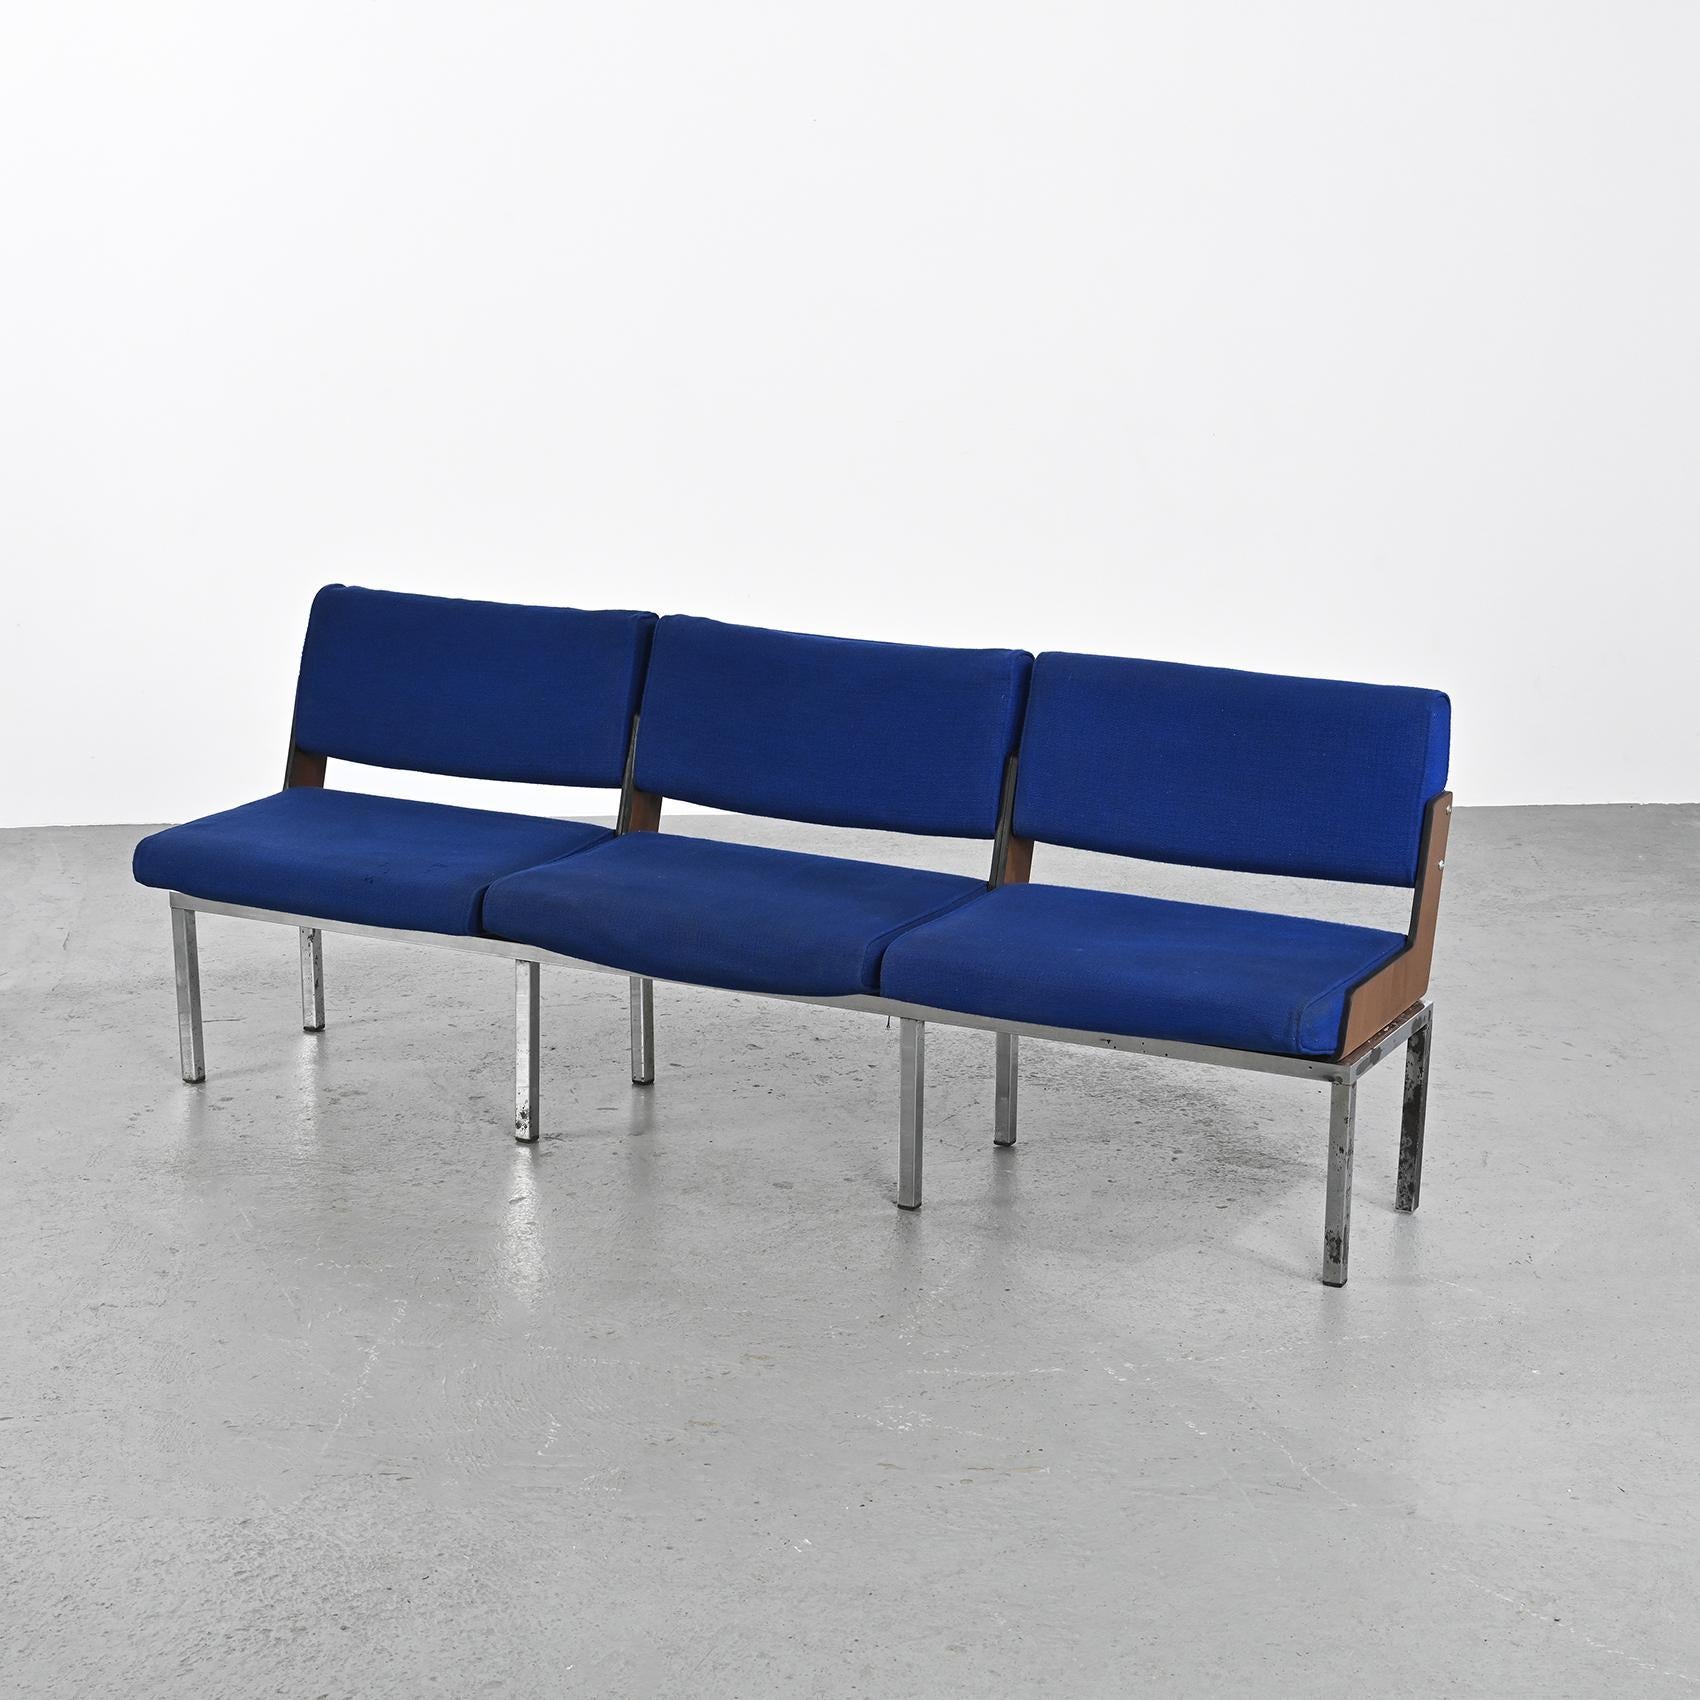 This bench, designed by the renowned French designer Roger Tallon, represents a variant of the ORCEL D 10 model.

Its chromed square tubular base provides a sturdy foundation, while the seats are cleverly connected to the backrests by sides made of